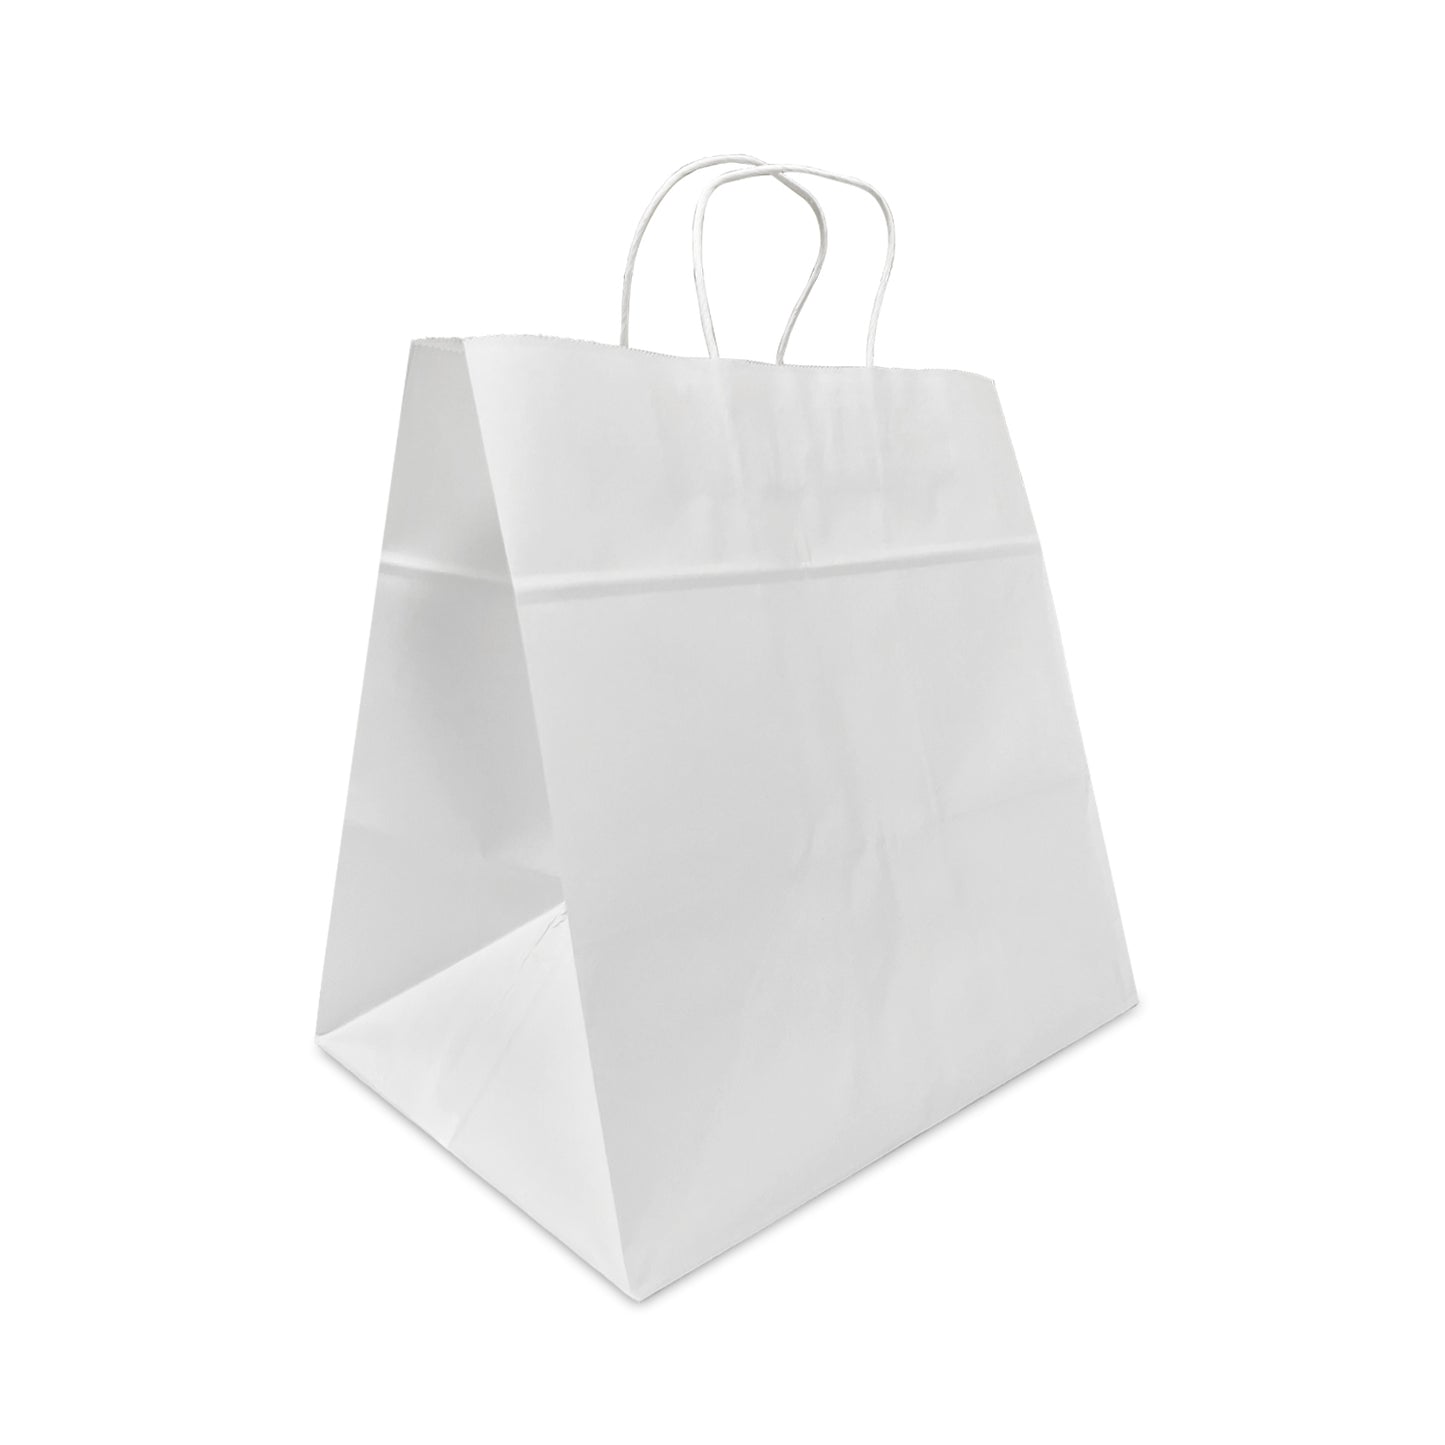 250 Pcs, Cake, 16x6x19.25 inches, White Kraft Paper Bags, with Twisted Handles